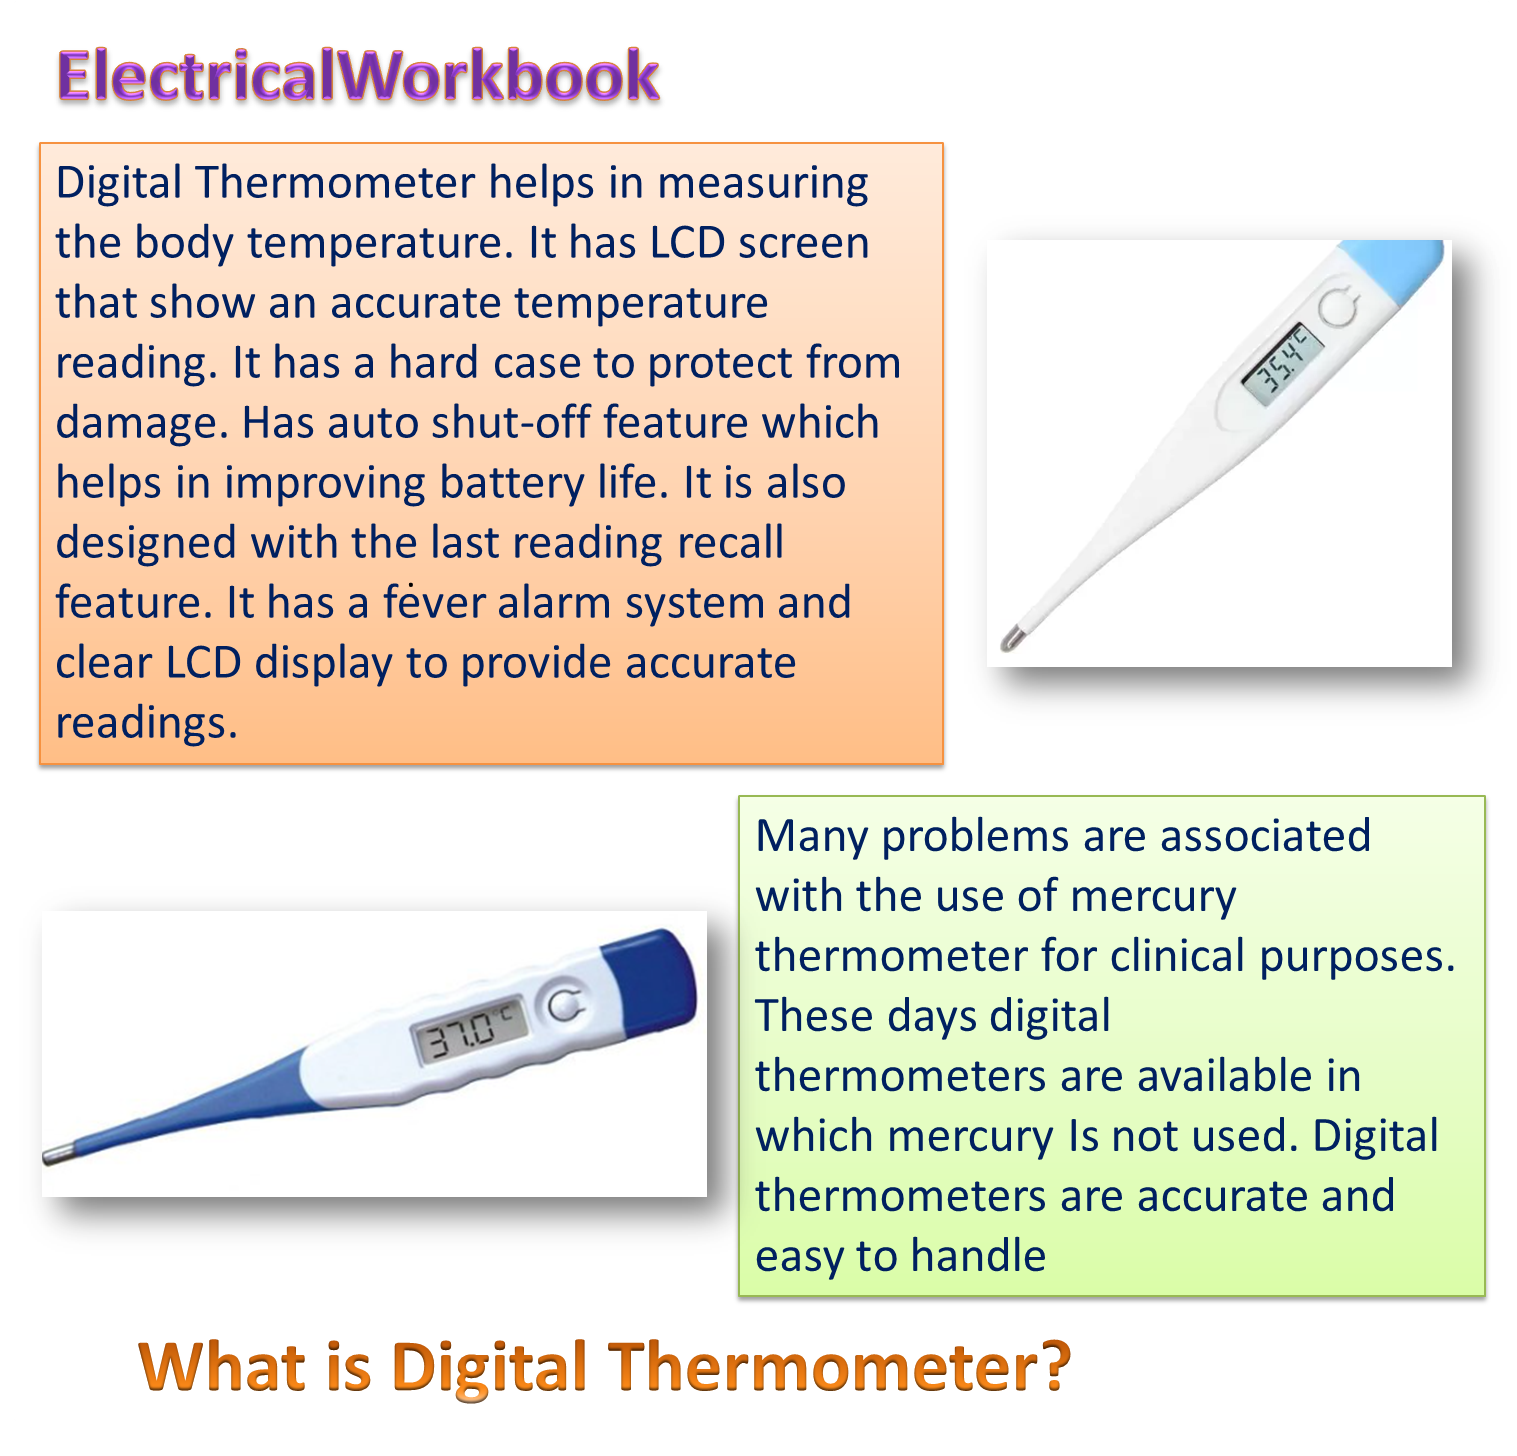 What is Digital Thermometer